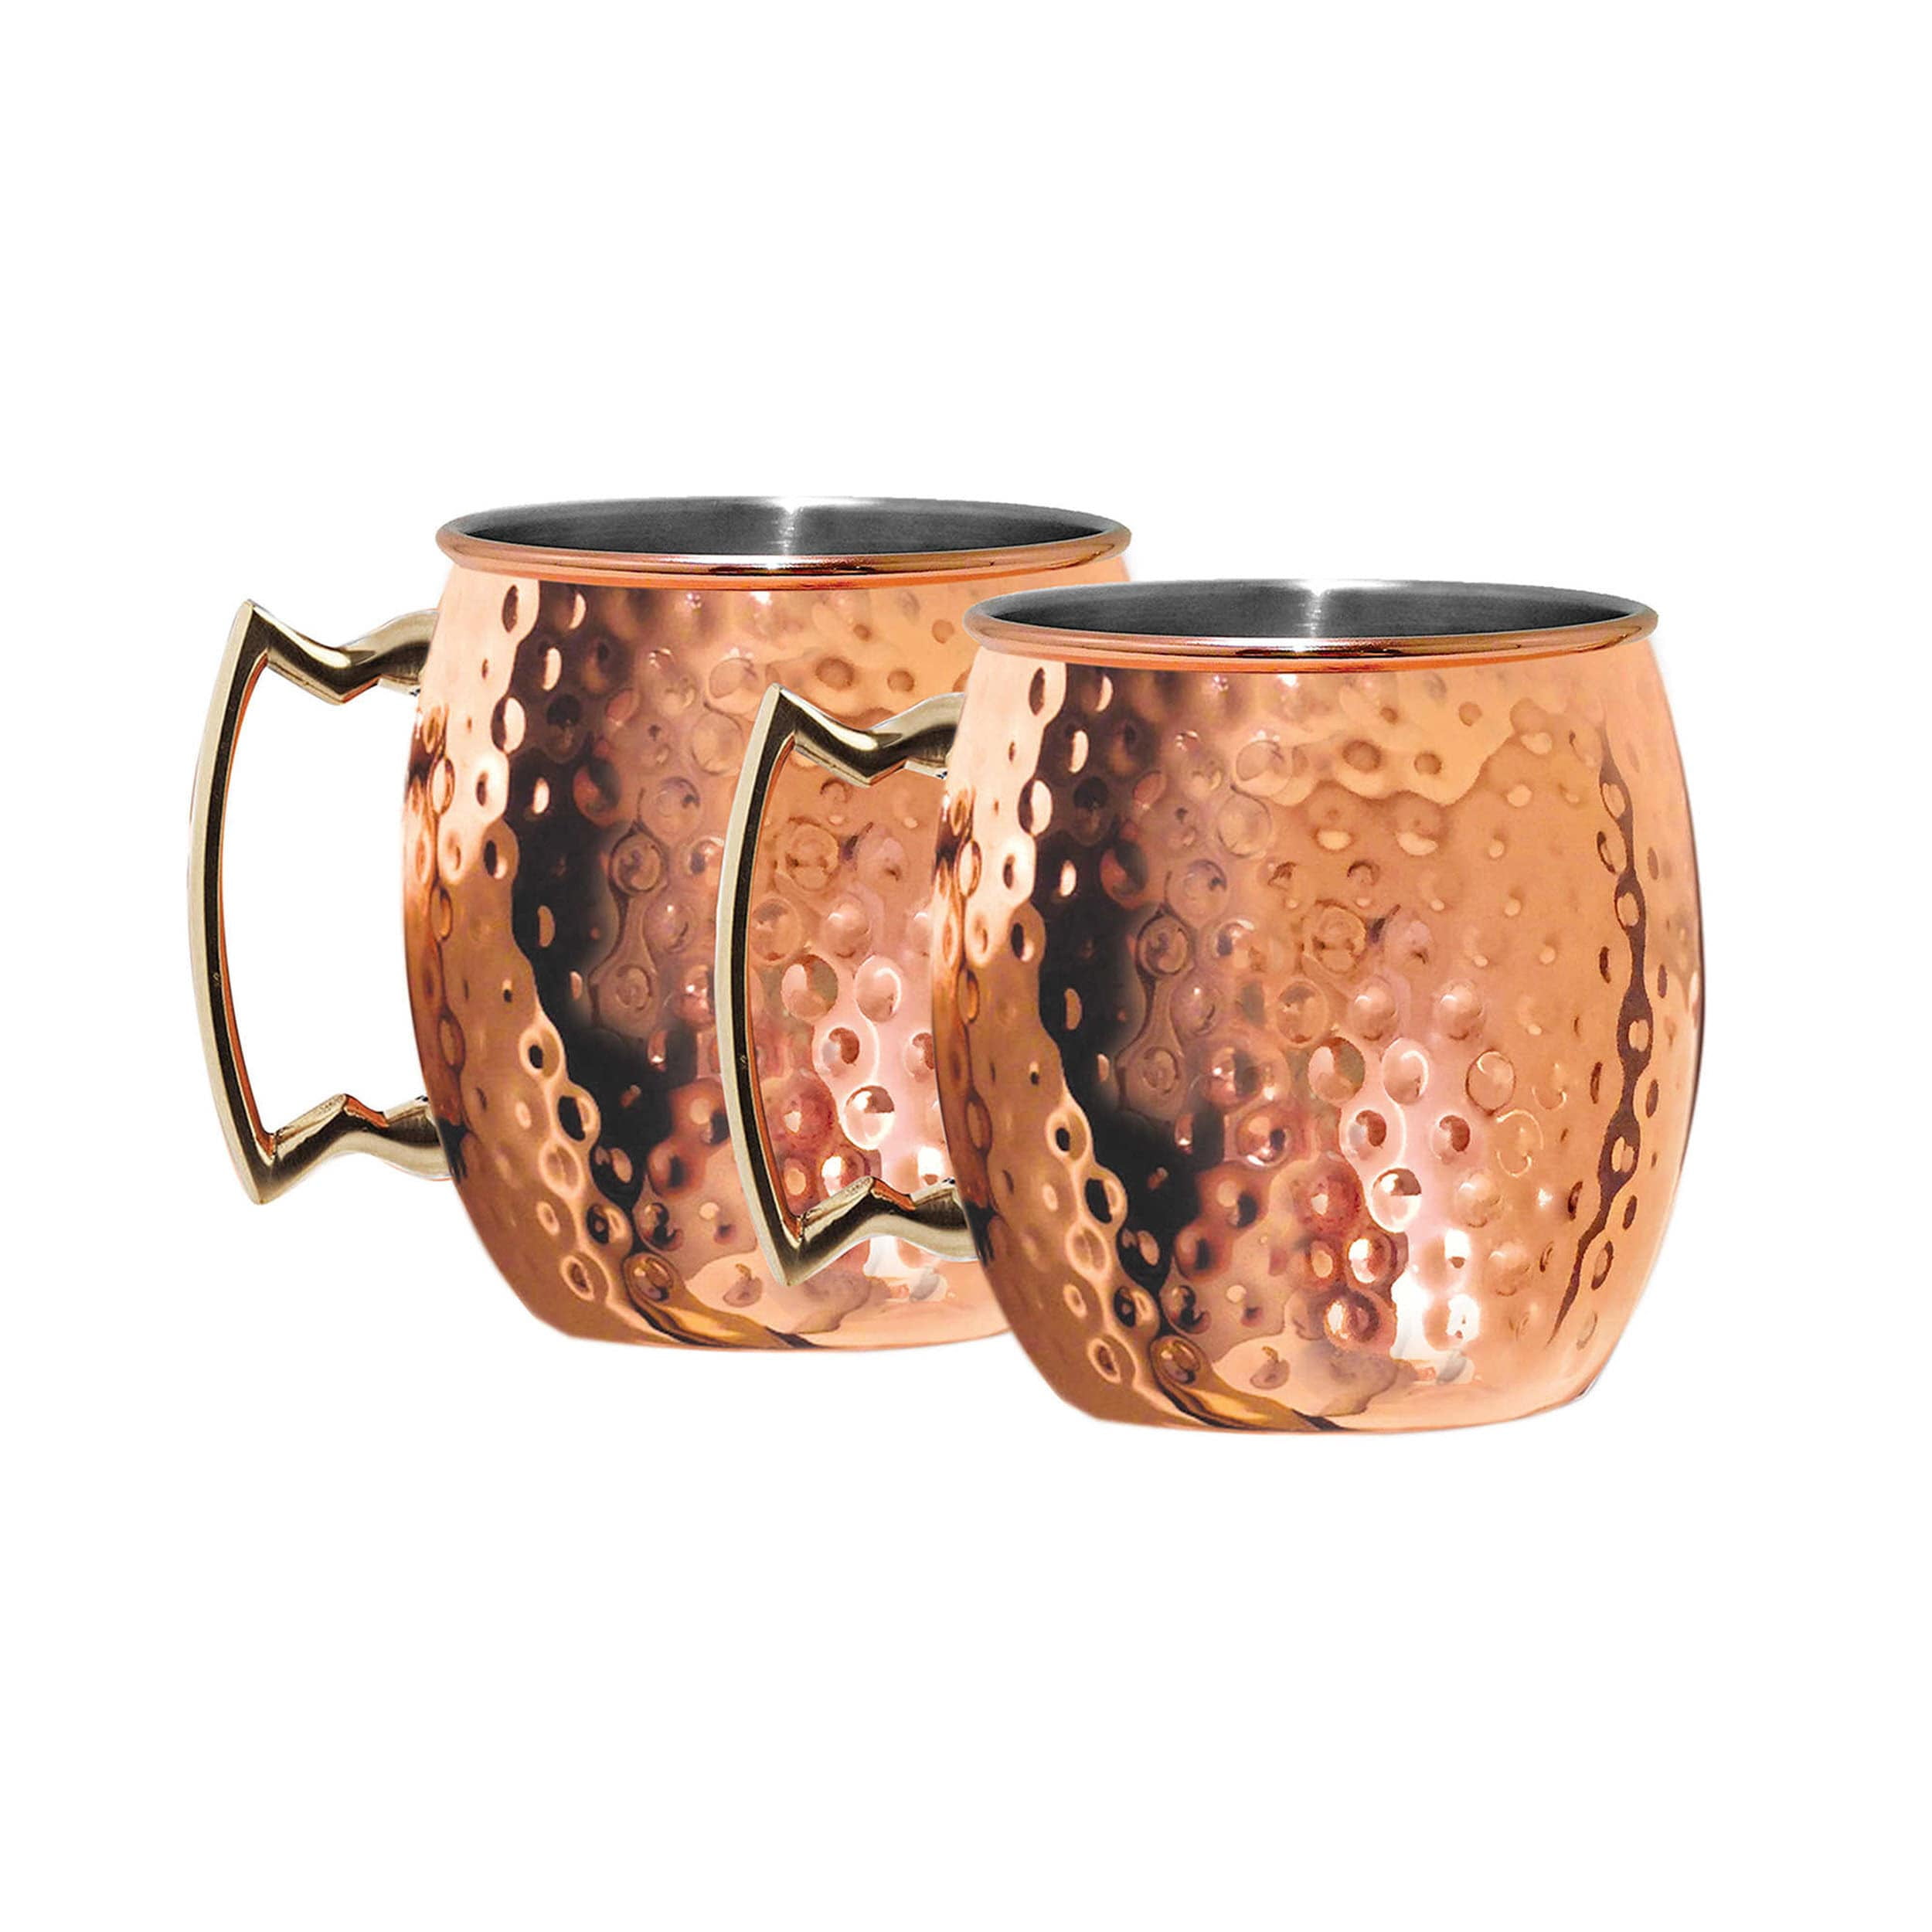 Shaker Hammered: 22oz Solid Copper Moscow Mule Shaker by Copper Mug Co.